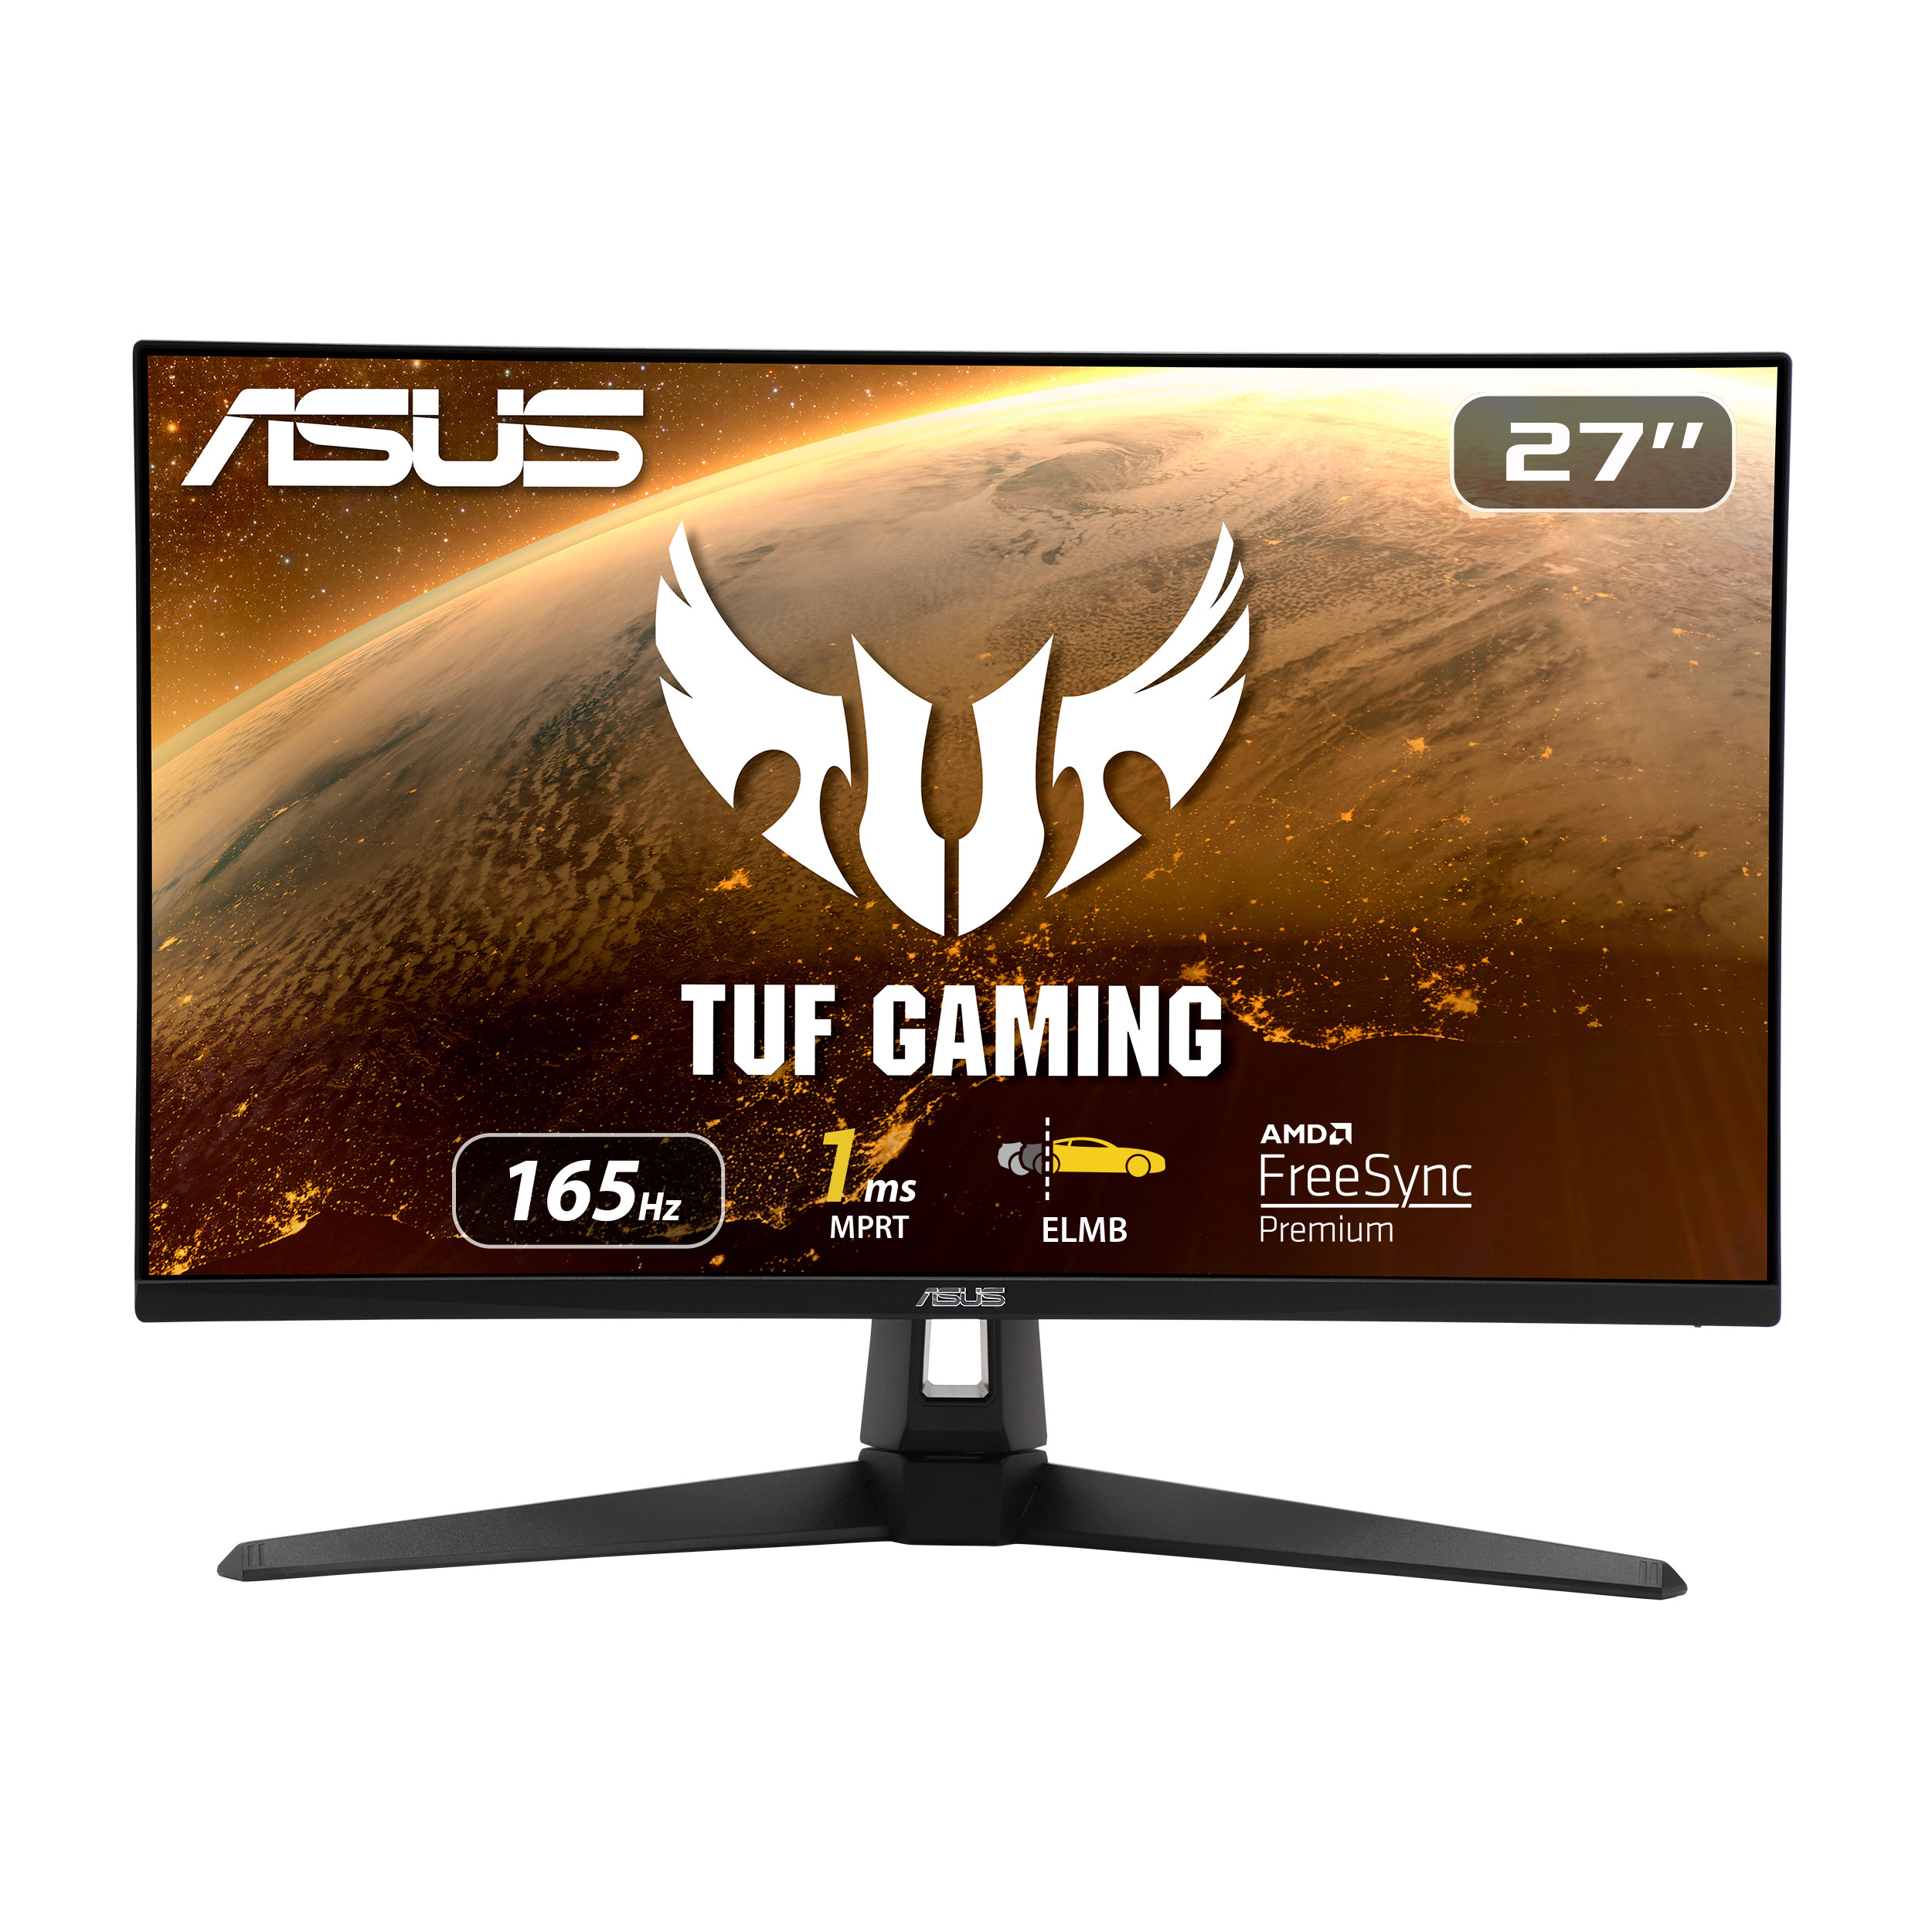 ASUS TUF Gaming 27” LED Gaming Monitor, 1080P Full HD, 165Hz (Supports 144Hz), IPS, 1ms - image 1 of 6